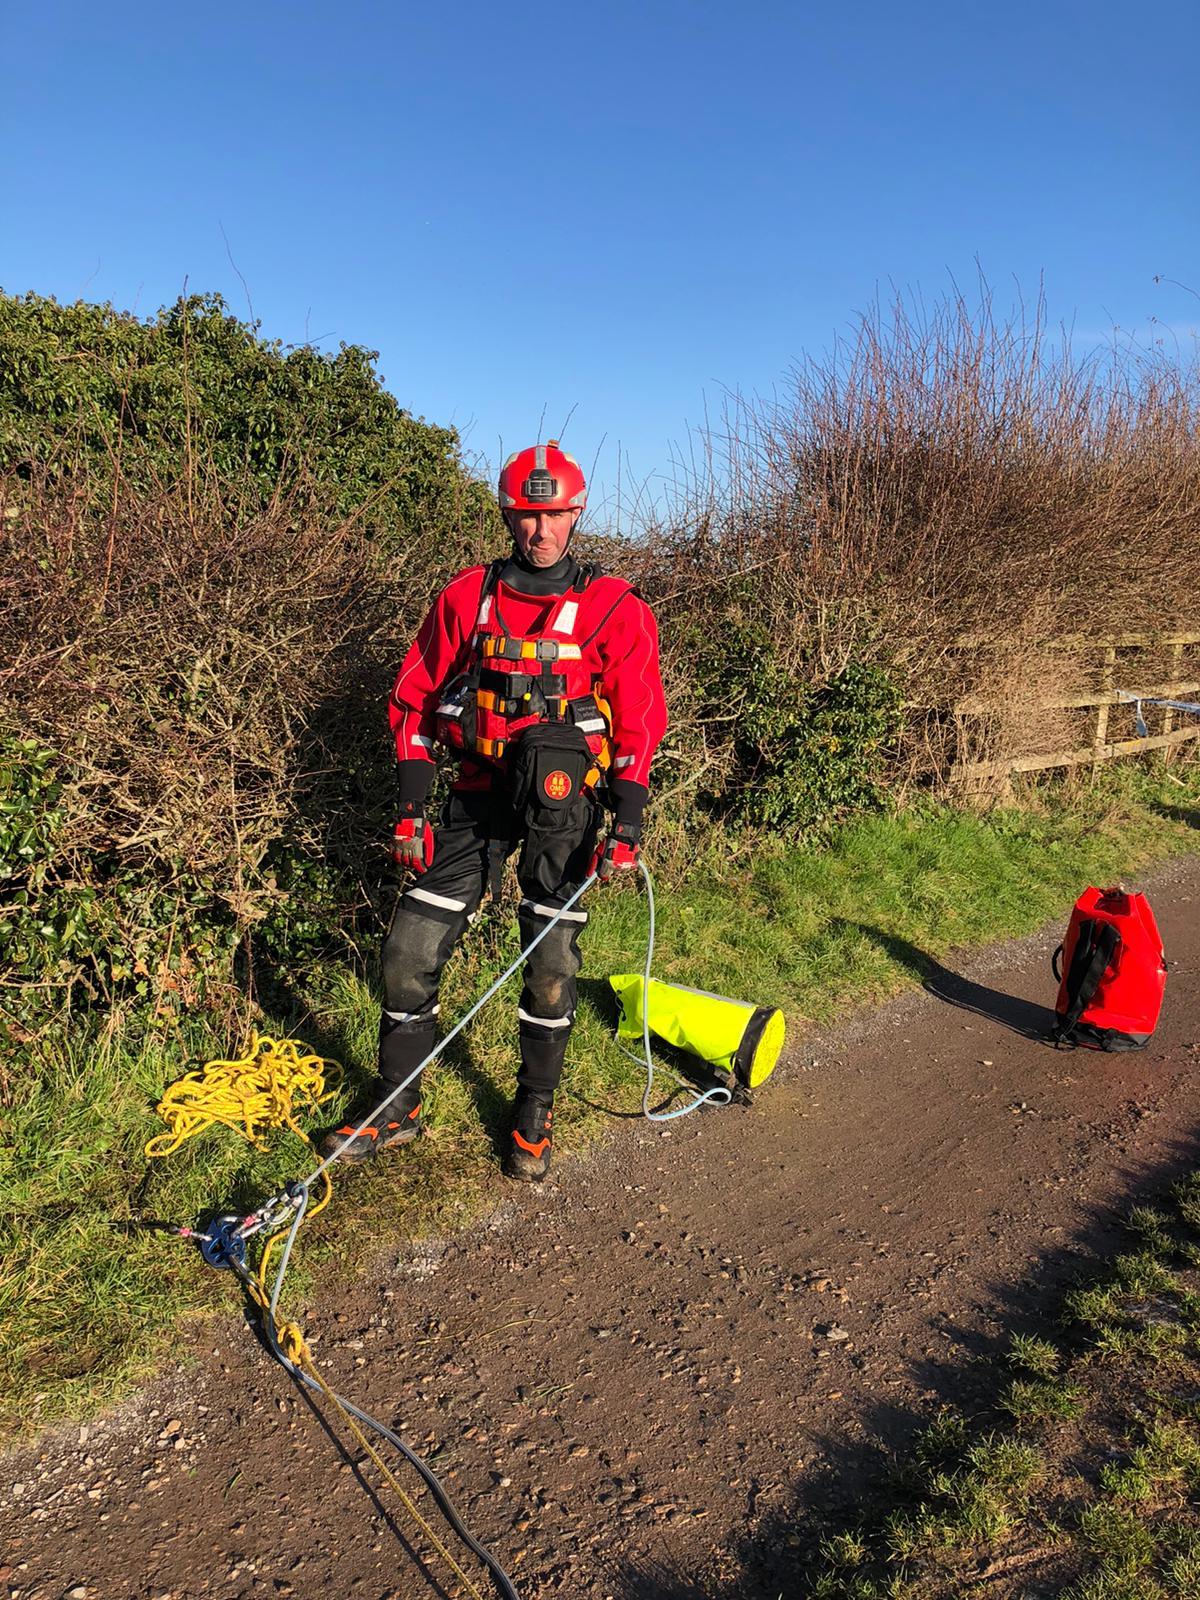 Damon Saddler who is a volunteer with Wiltshire Search and Rescue